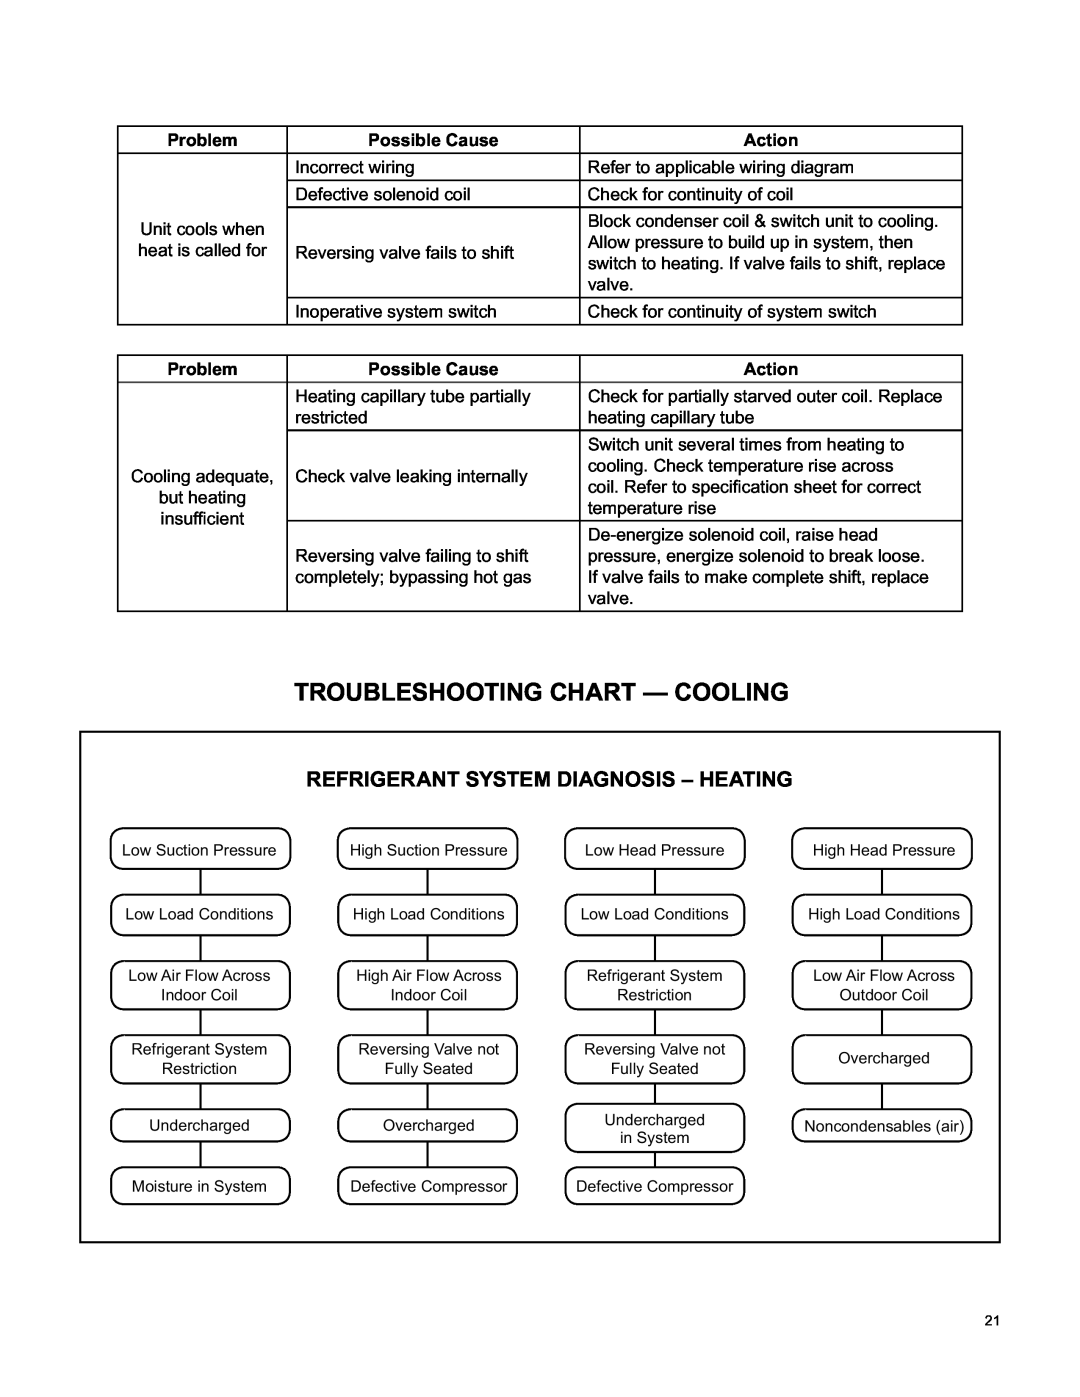 Friedrich RAC-SVC-06 service manual Troubleshooting Chart - Cooling, Refrigerant System Diagnosis - Heating 